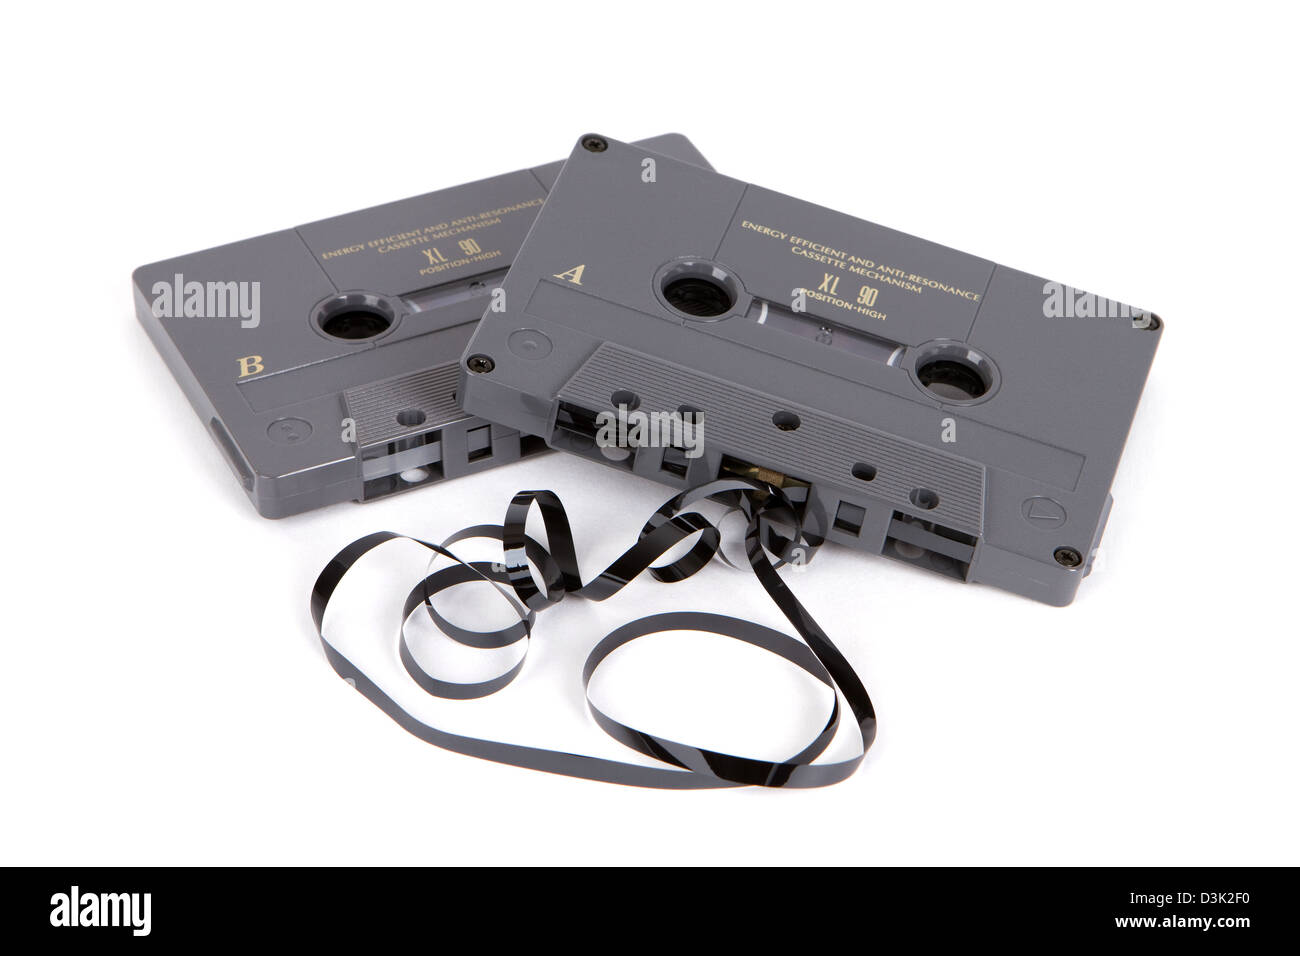 Obsolete magnetic audio cassette tapes partially unwound on a white background. Stock Photo